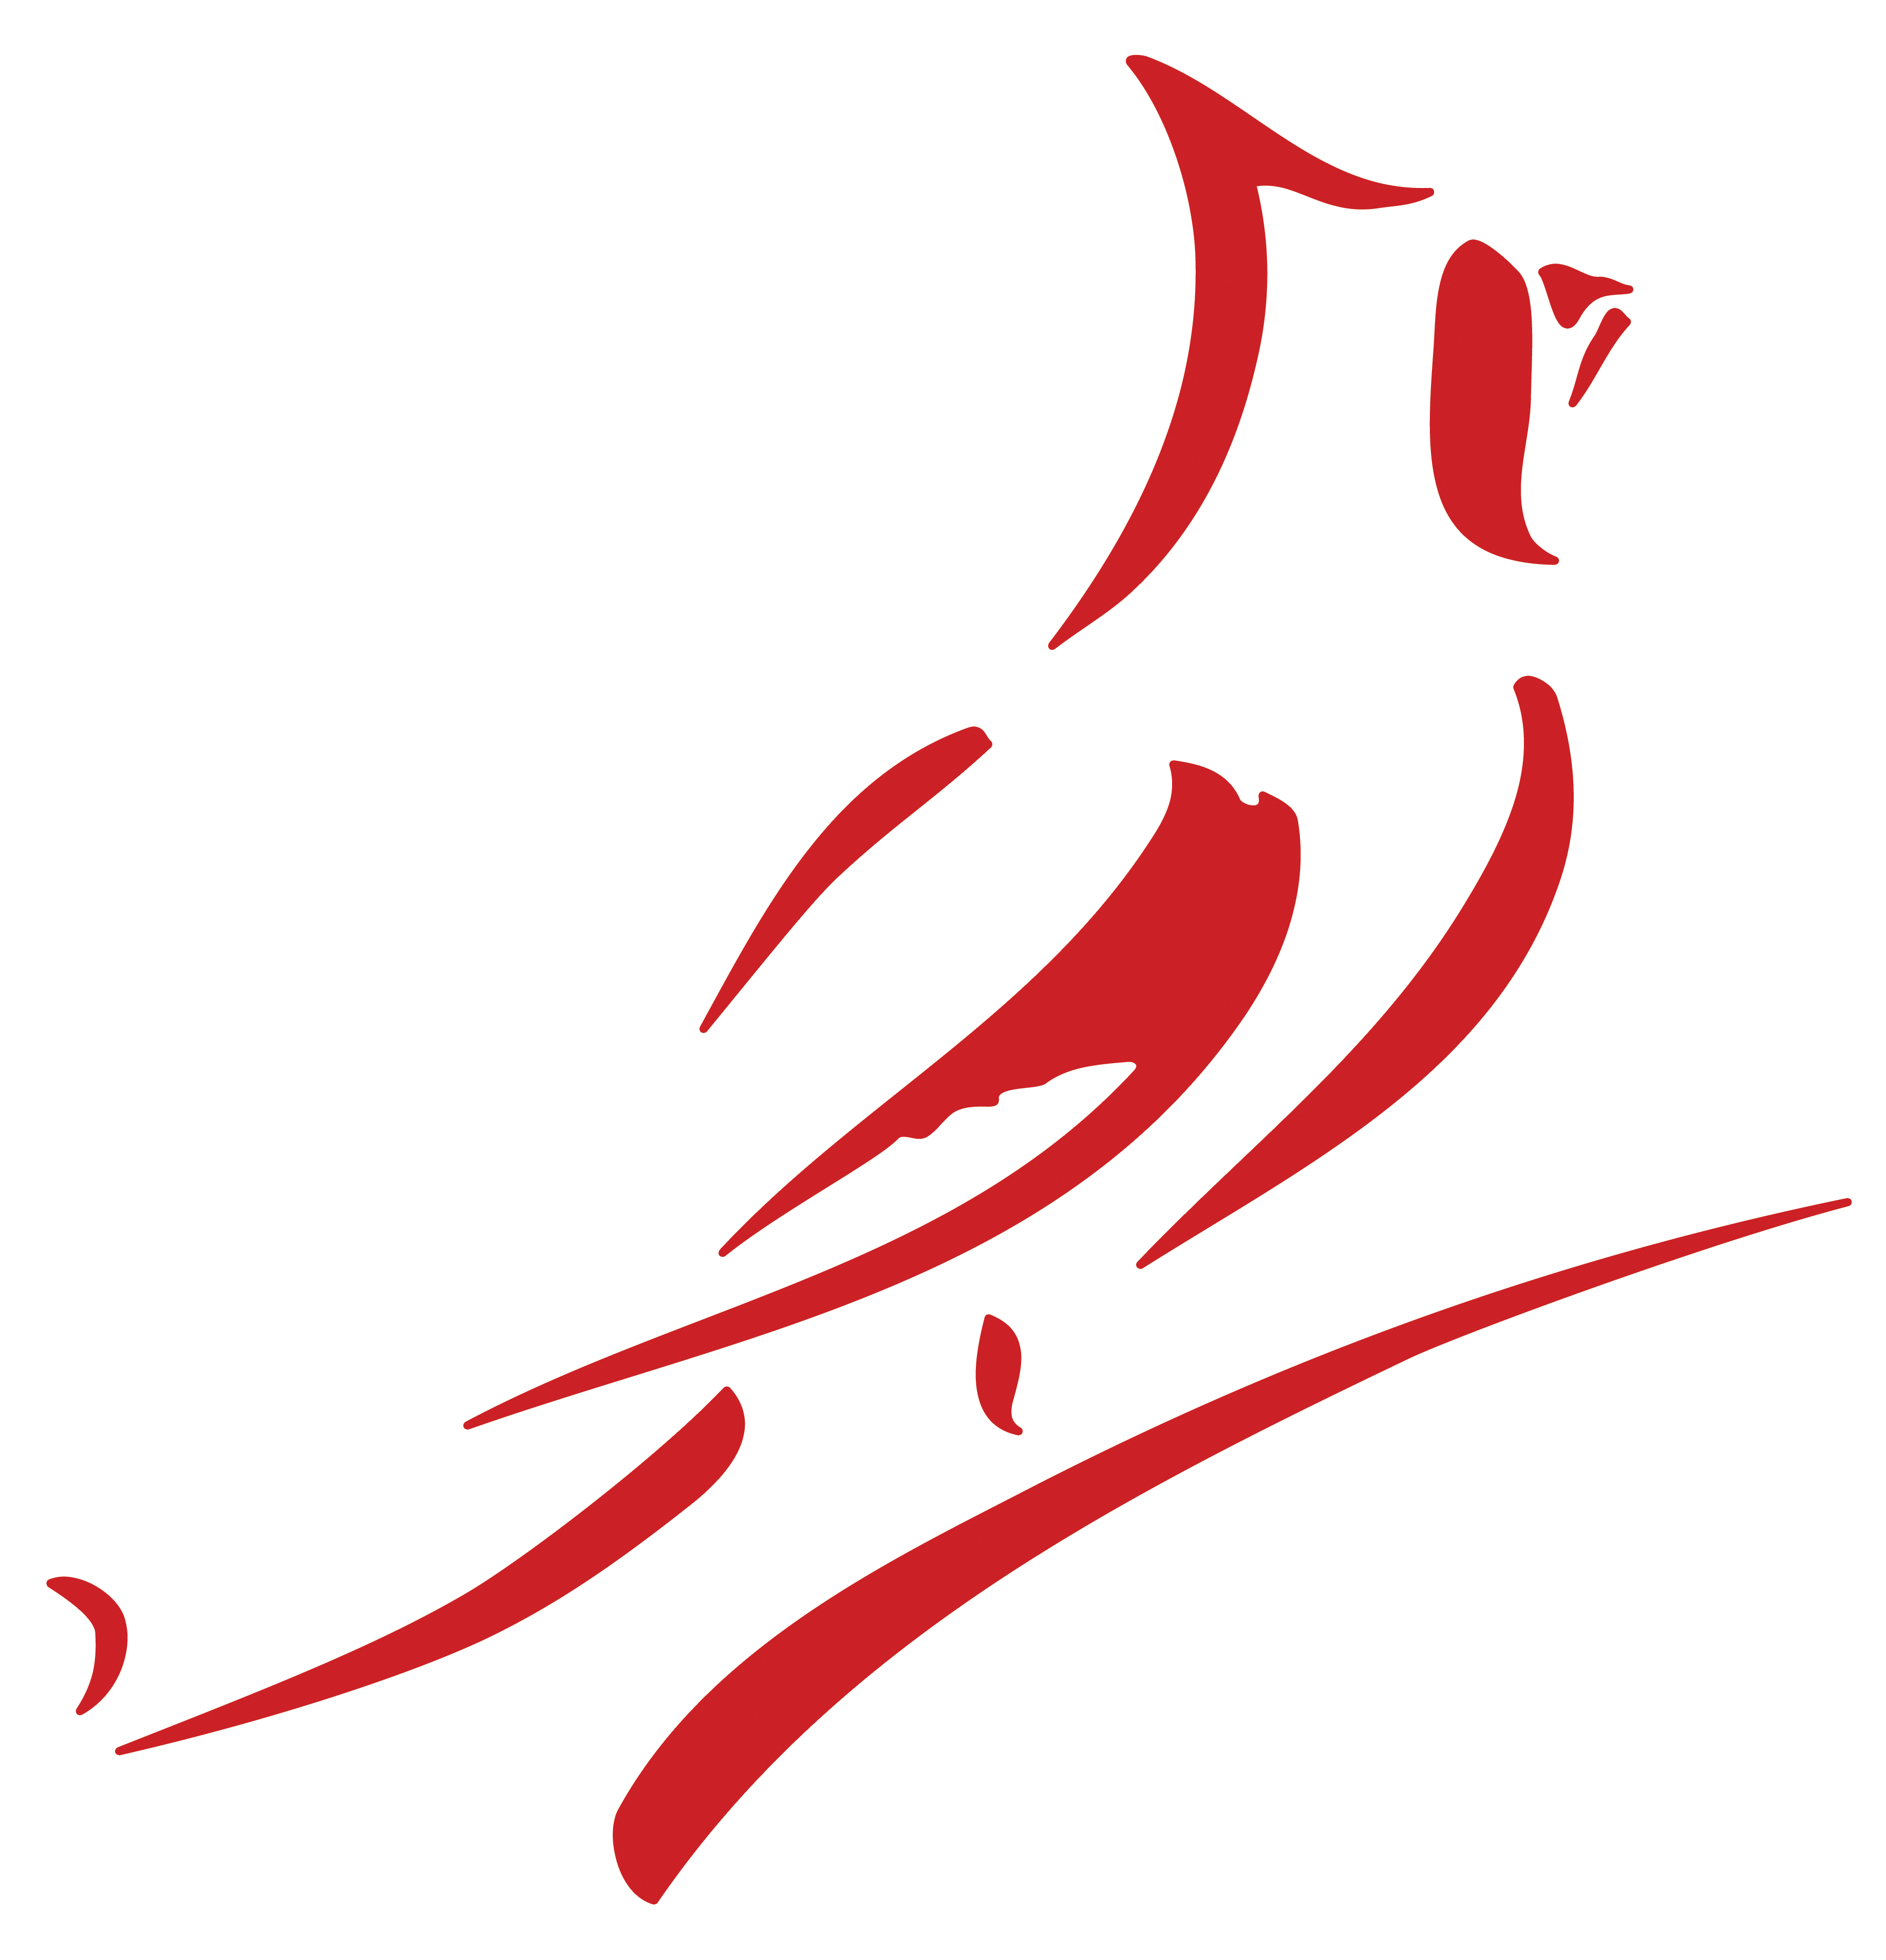 https://cardinalscale.com/themes/ee/site/default/asset/img/resources/resources_images/Cardinal-Detecto-Logo-Bird-Isolated.jpg